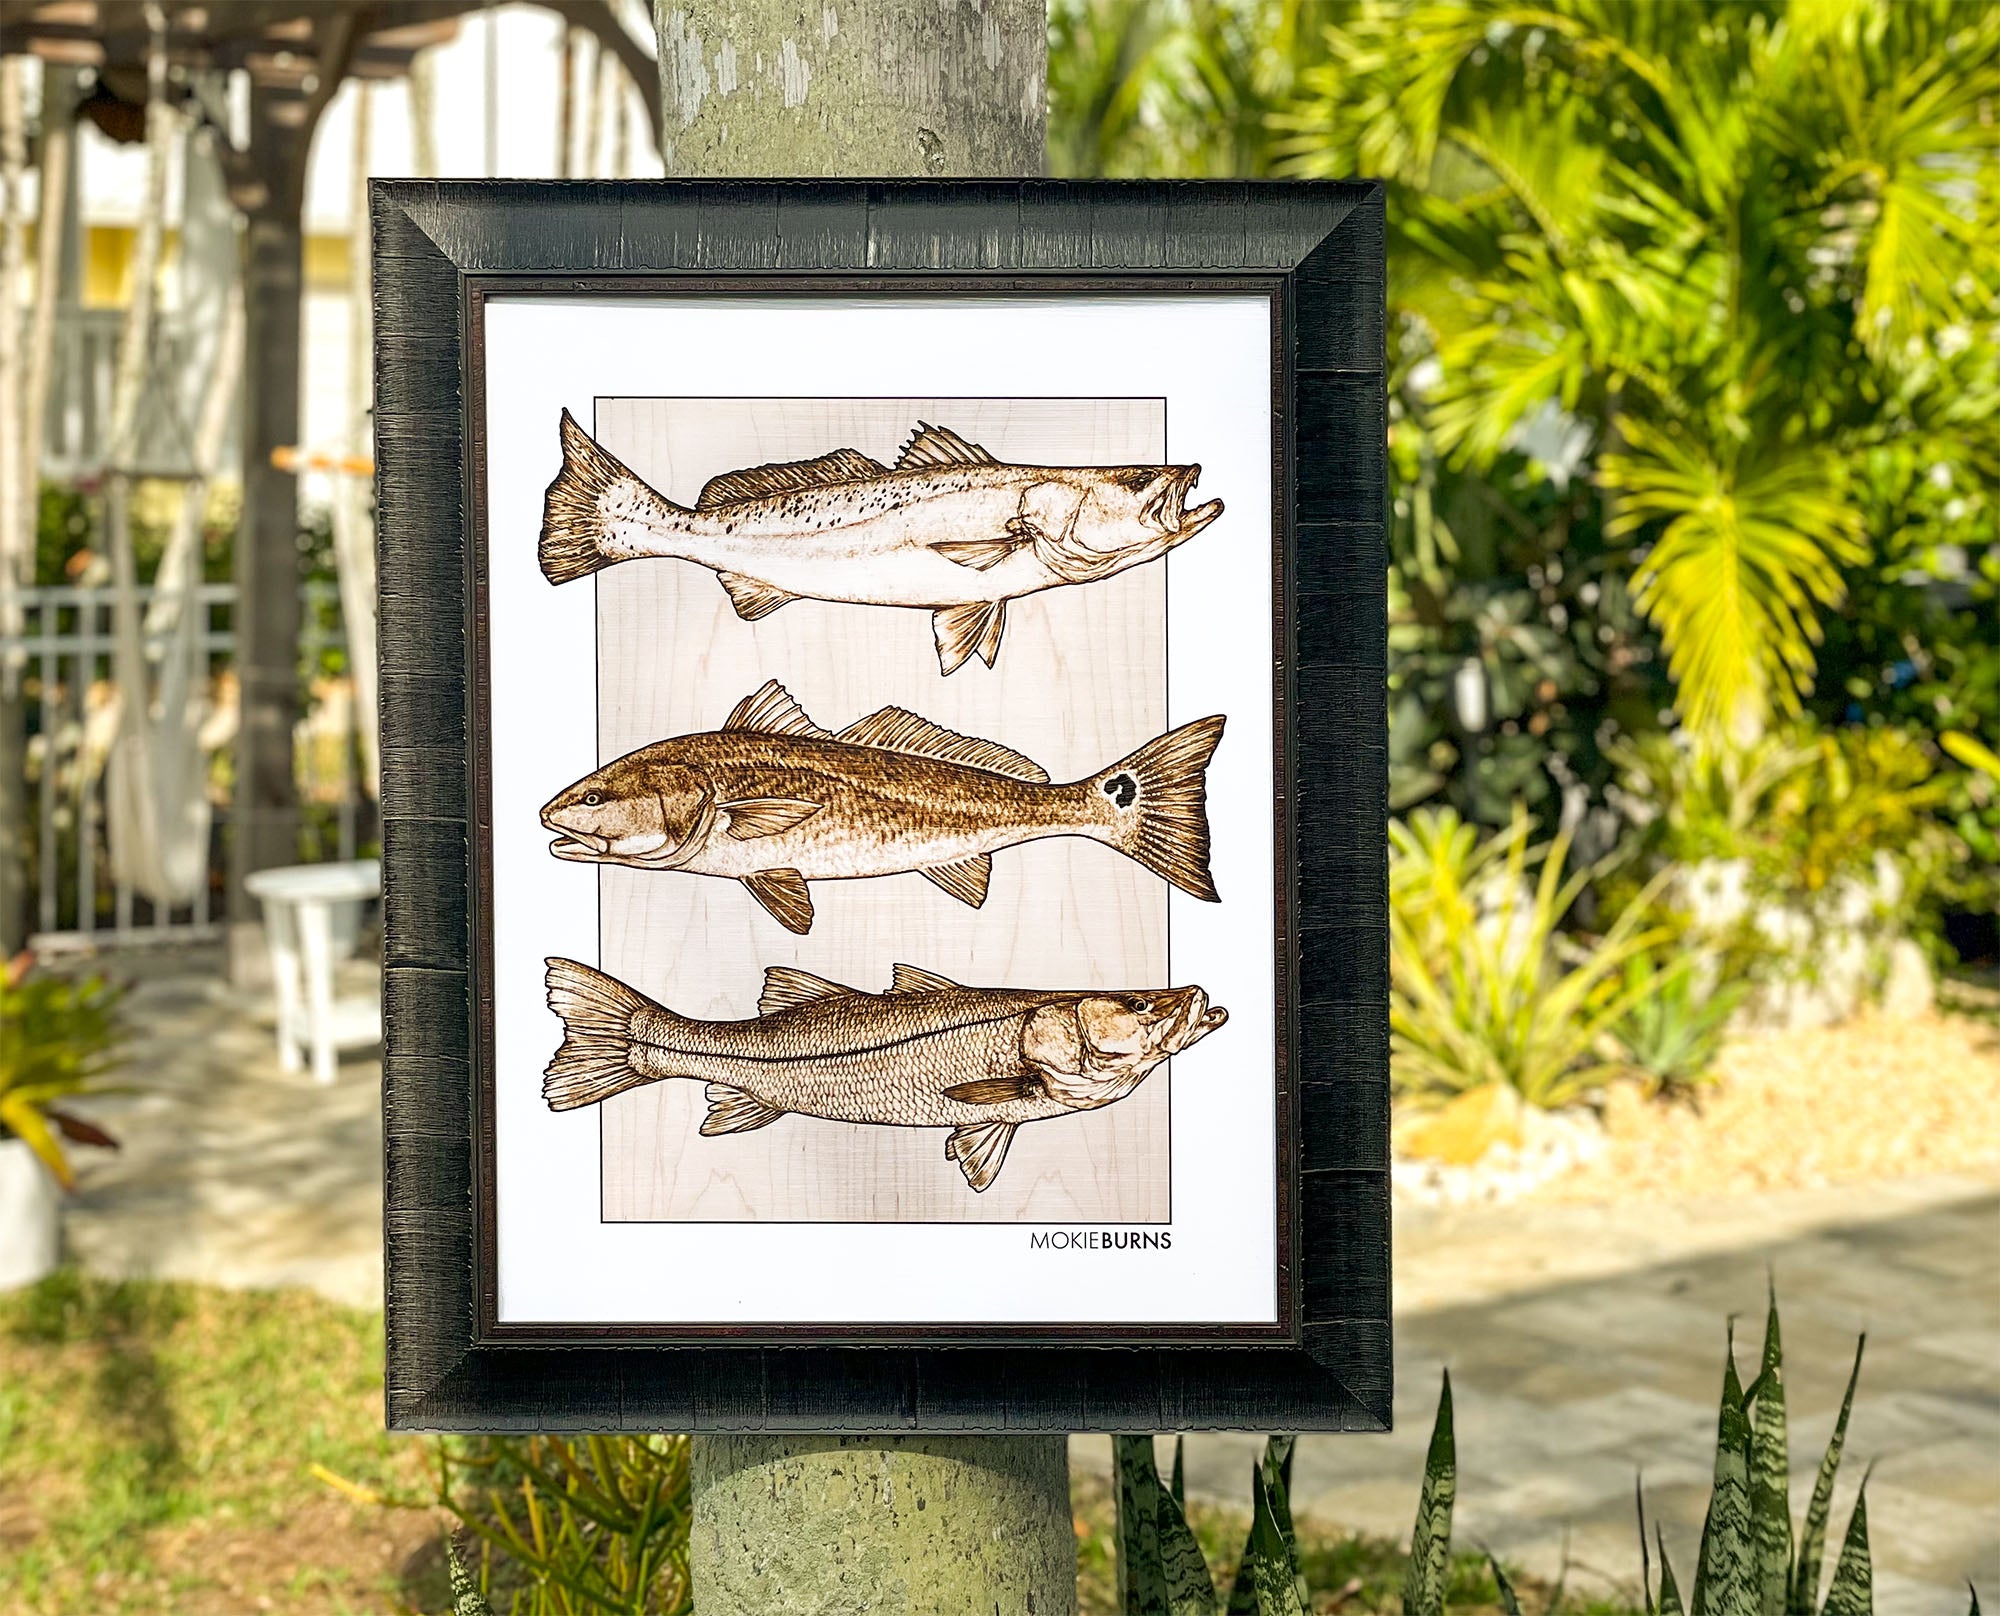 Inshore Slam [speckled seatrout, redfish and snook] - 19x25 Signed Poster  Print saltwater fishing artwork for man cave, housewarming gift or dorm room